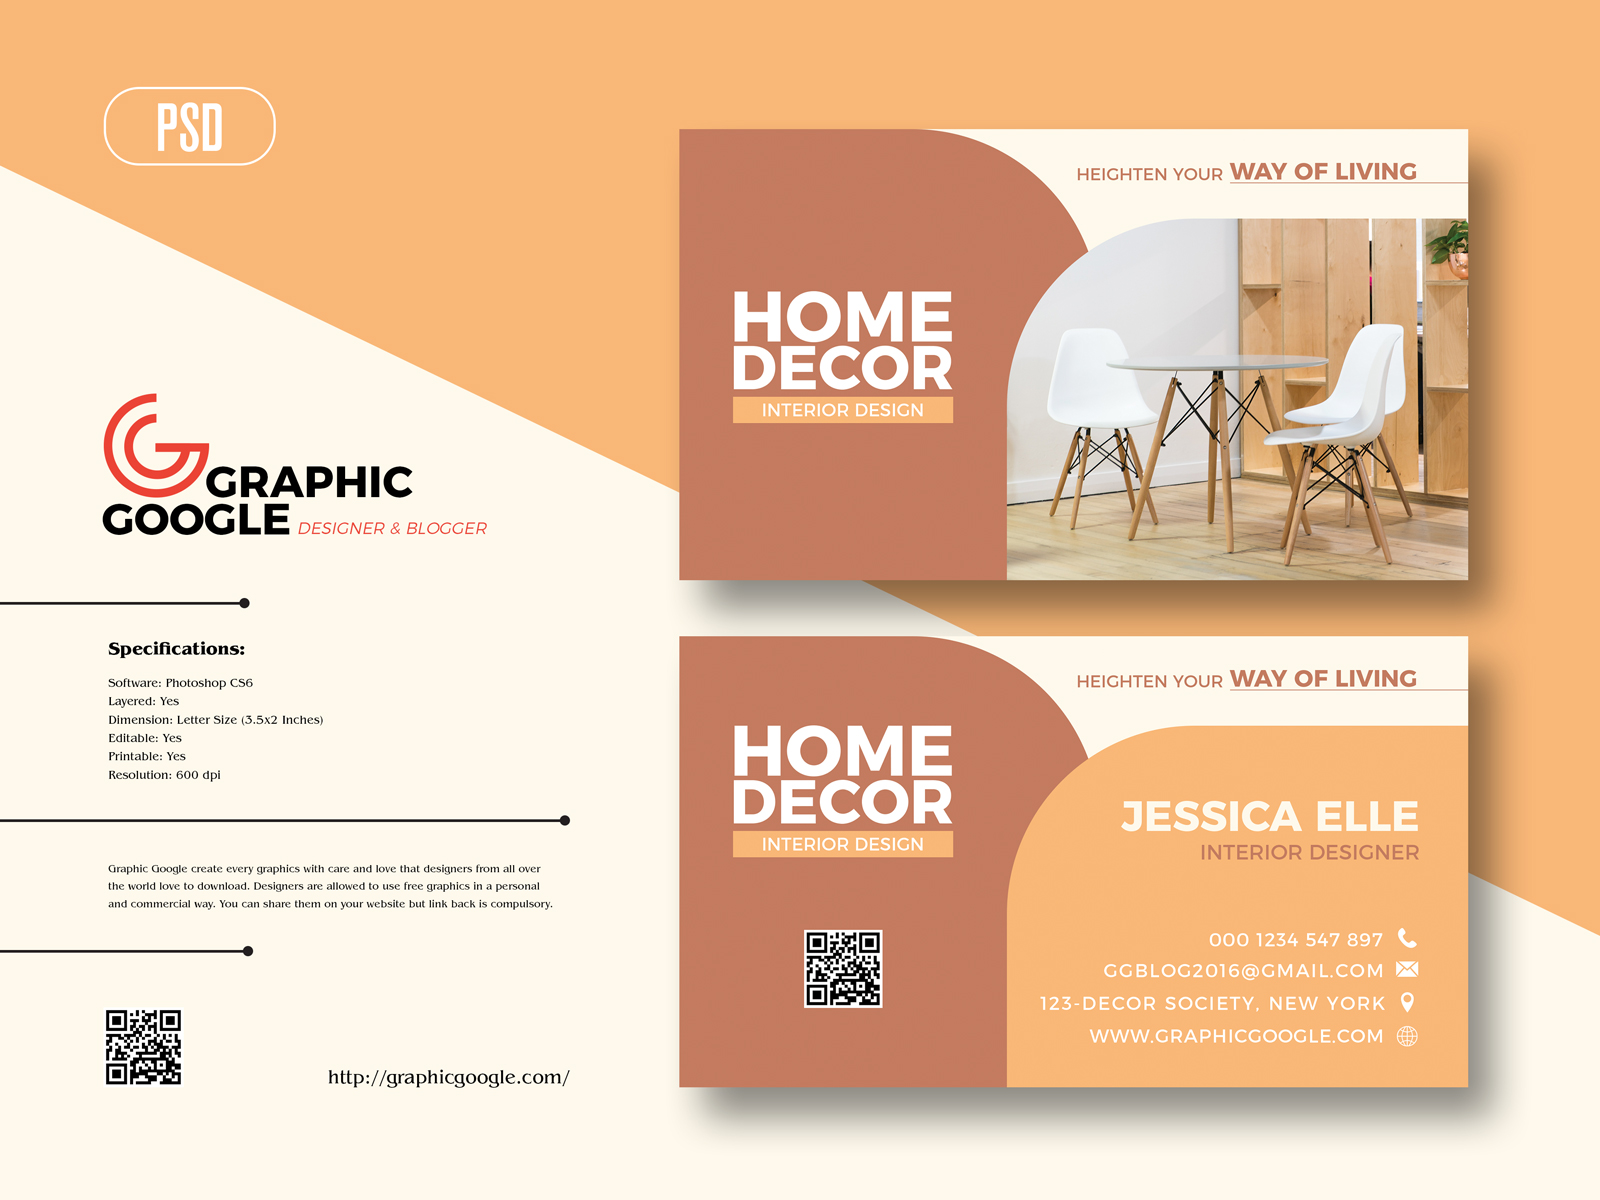 free business cards templates to print at home